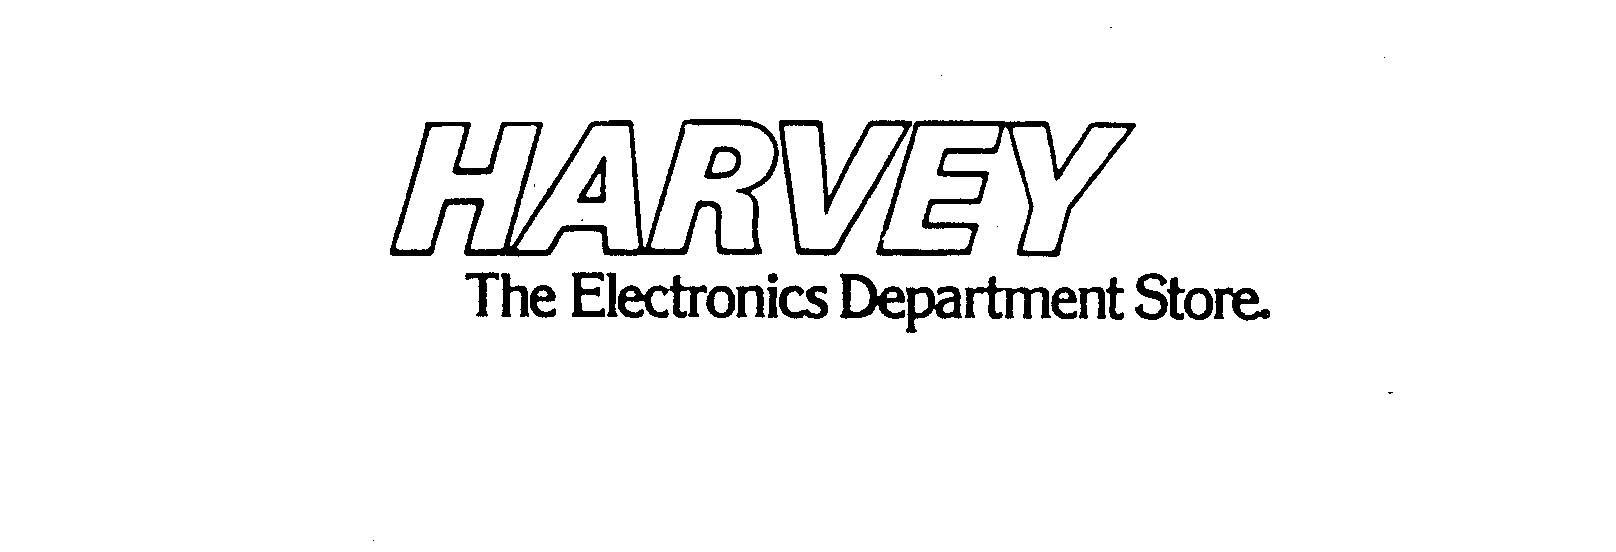  HARVEY THE ELECTRONICS DEPARTMENT STORE